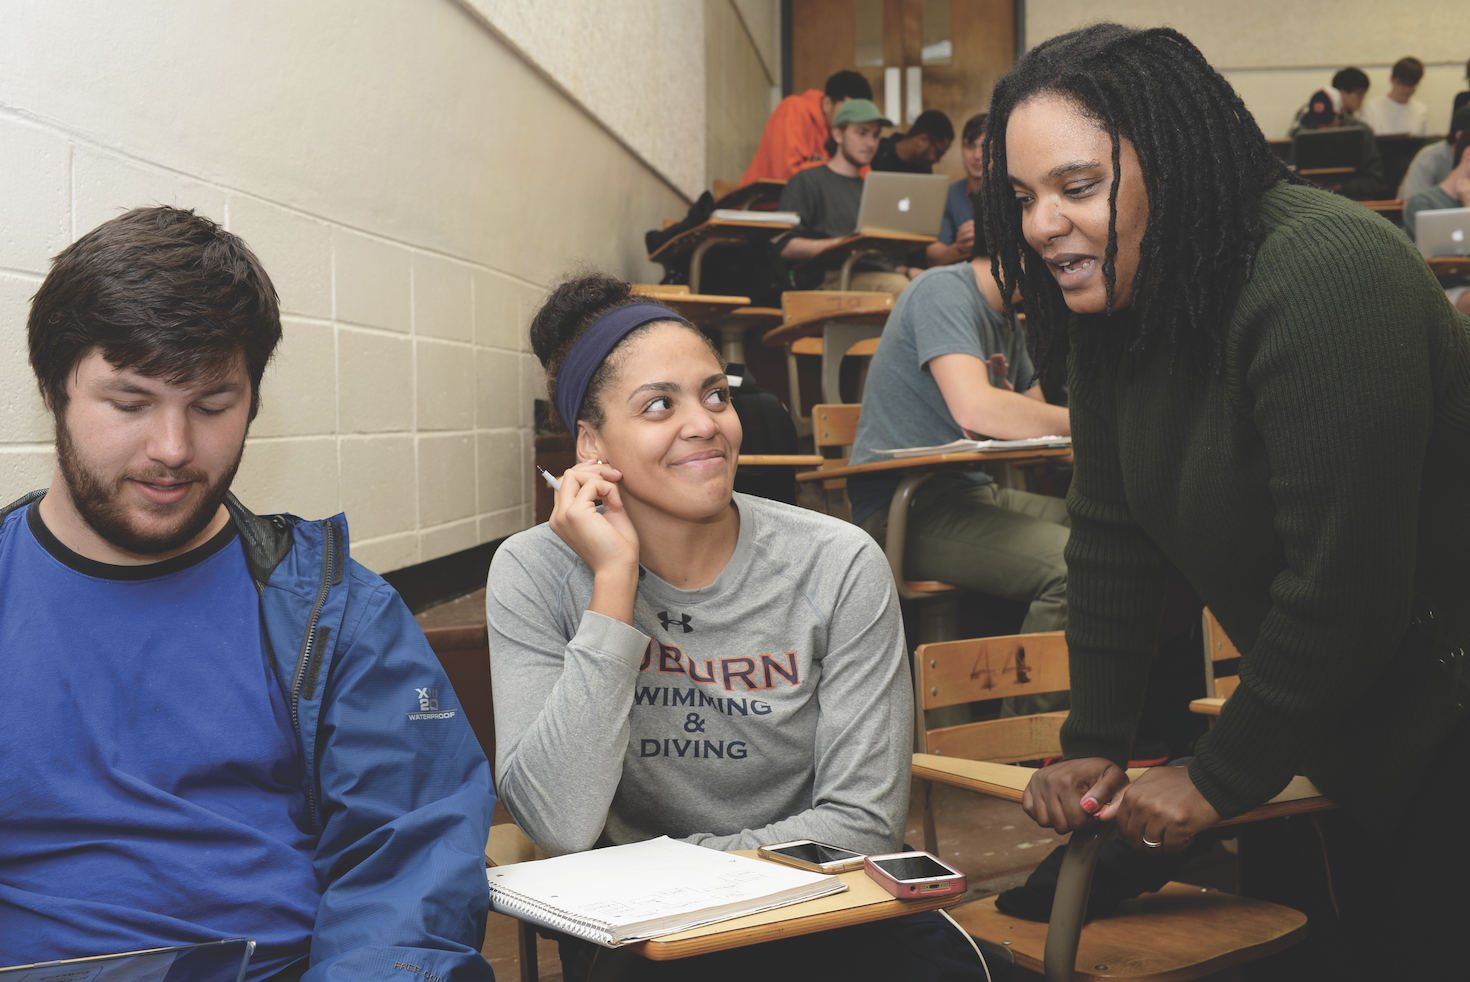 Jakita Thomas (right) knows firsthand just how underrepresented women of color are in the computing discipline. Her research on the subject aims to break down the barriers these women face.